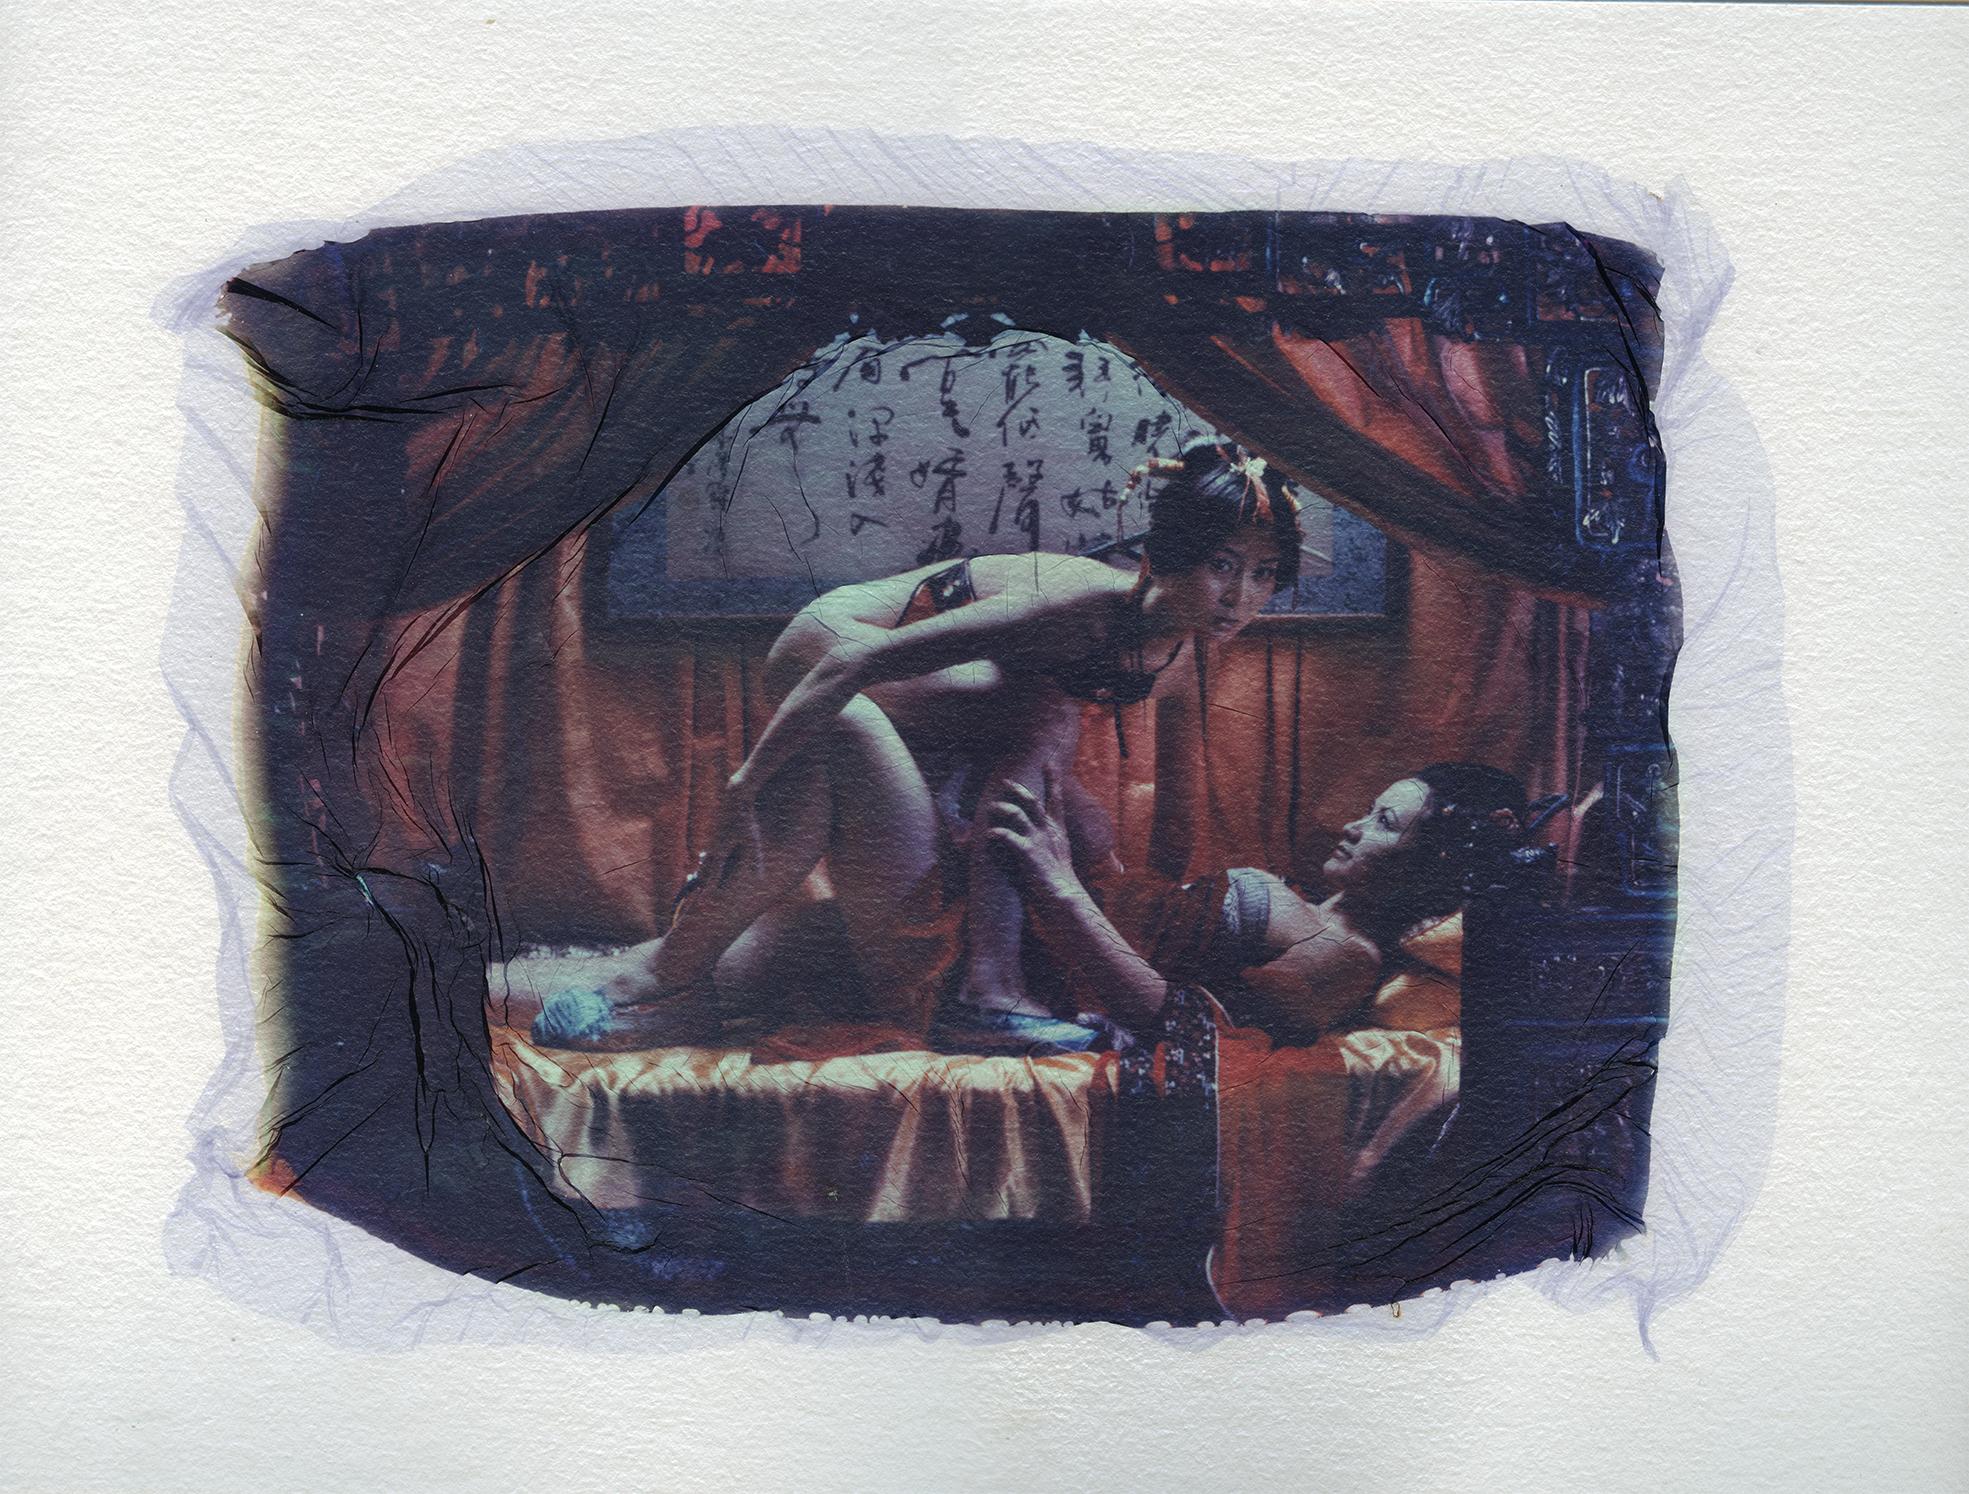 xulong zhang Nude Photograph - Untitled (Chinese Classical) - Contemporary, Figurative, Women, Polaroid, Nude